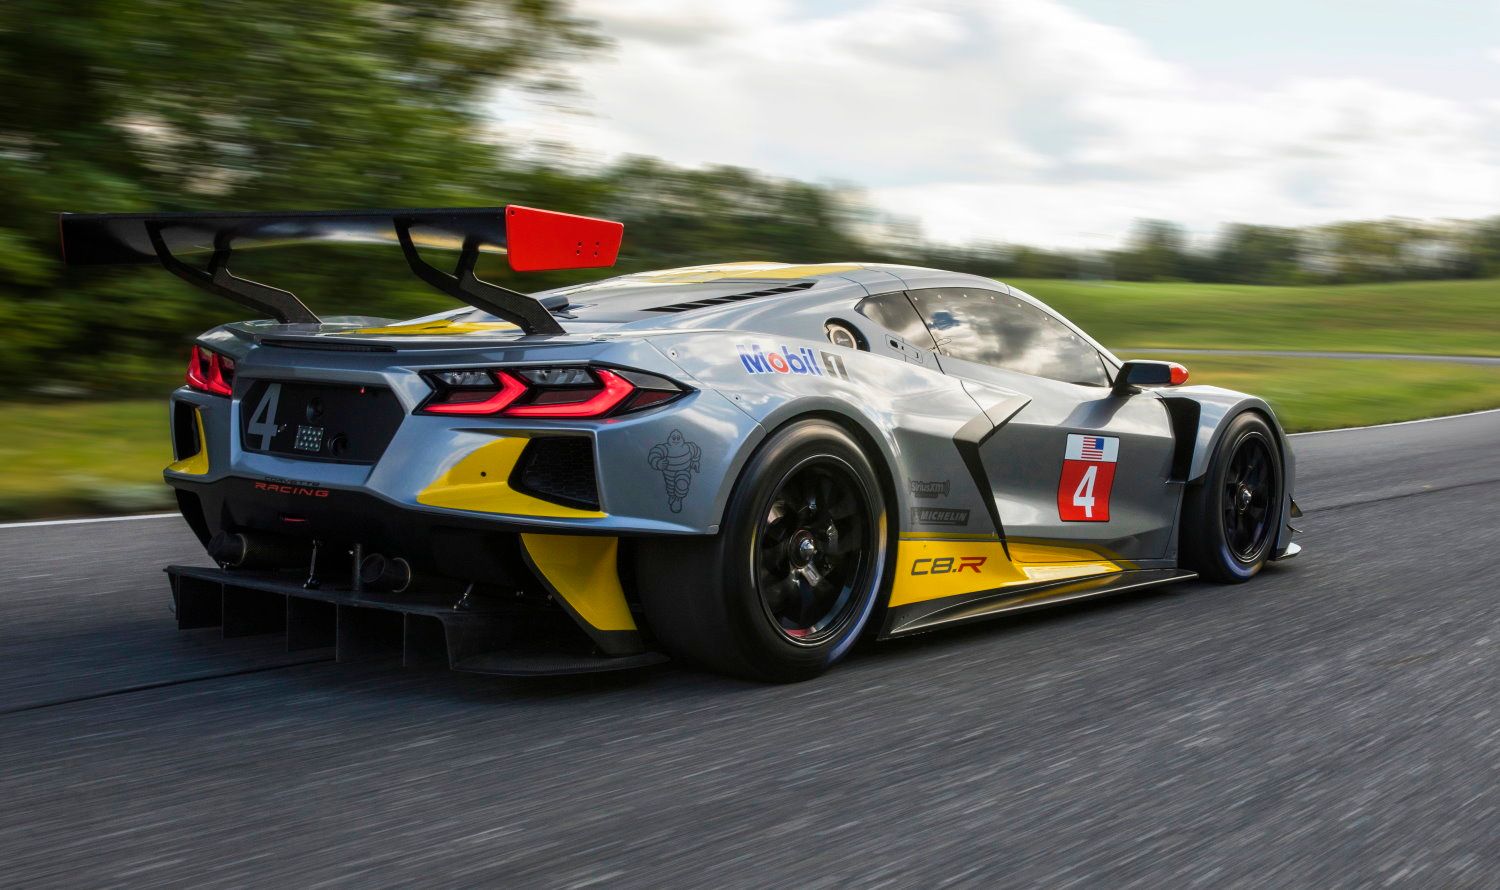 The Corvette C8.R is Chevy???s first mid-engine GTLM race car. The No. 4 car dons a new silver livery, inspired by the color of iconic Corvette concepts. The No. 3 car will feature a traditional yellow color scheme with silver accents.